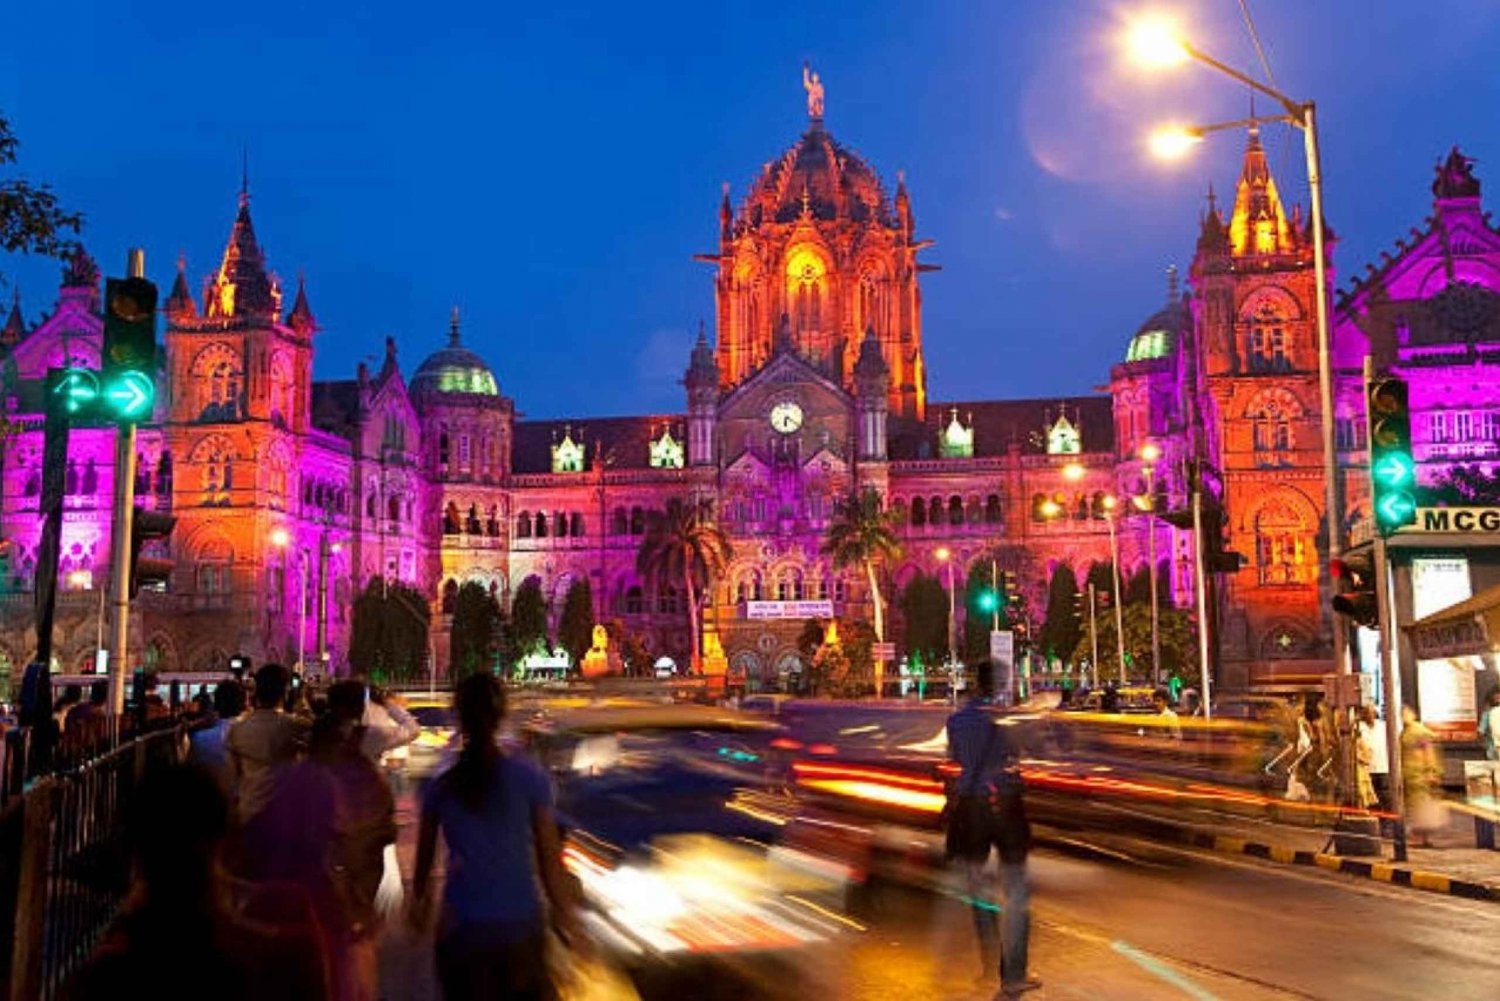 Private Mumbai Sightseeing Full or Half-Day Tour